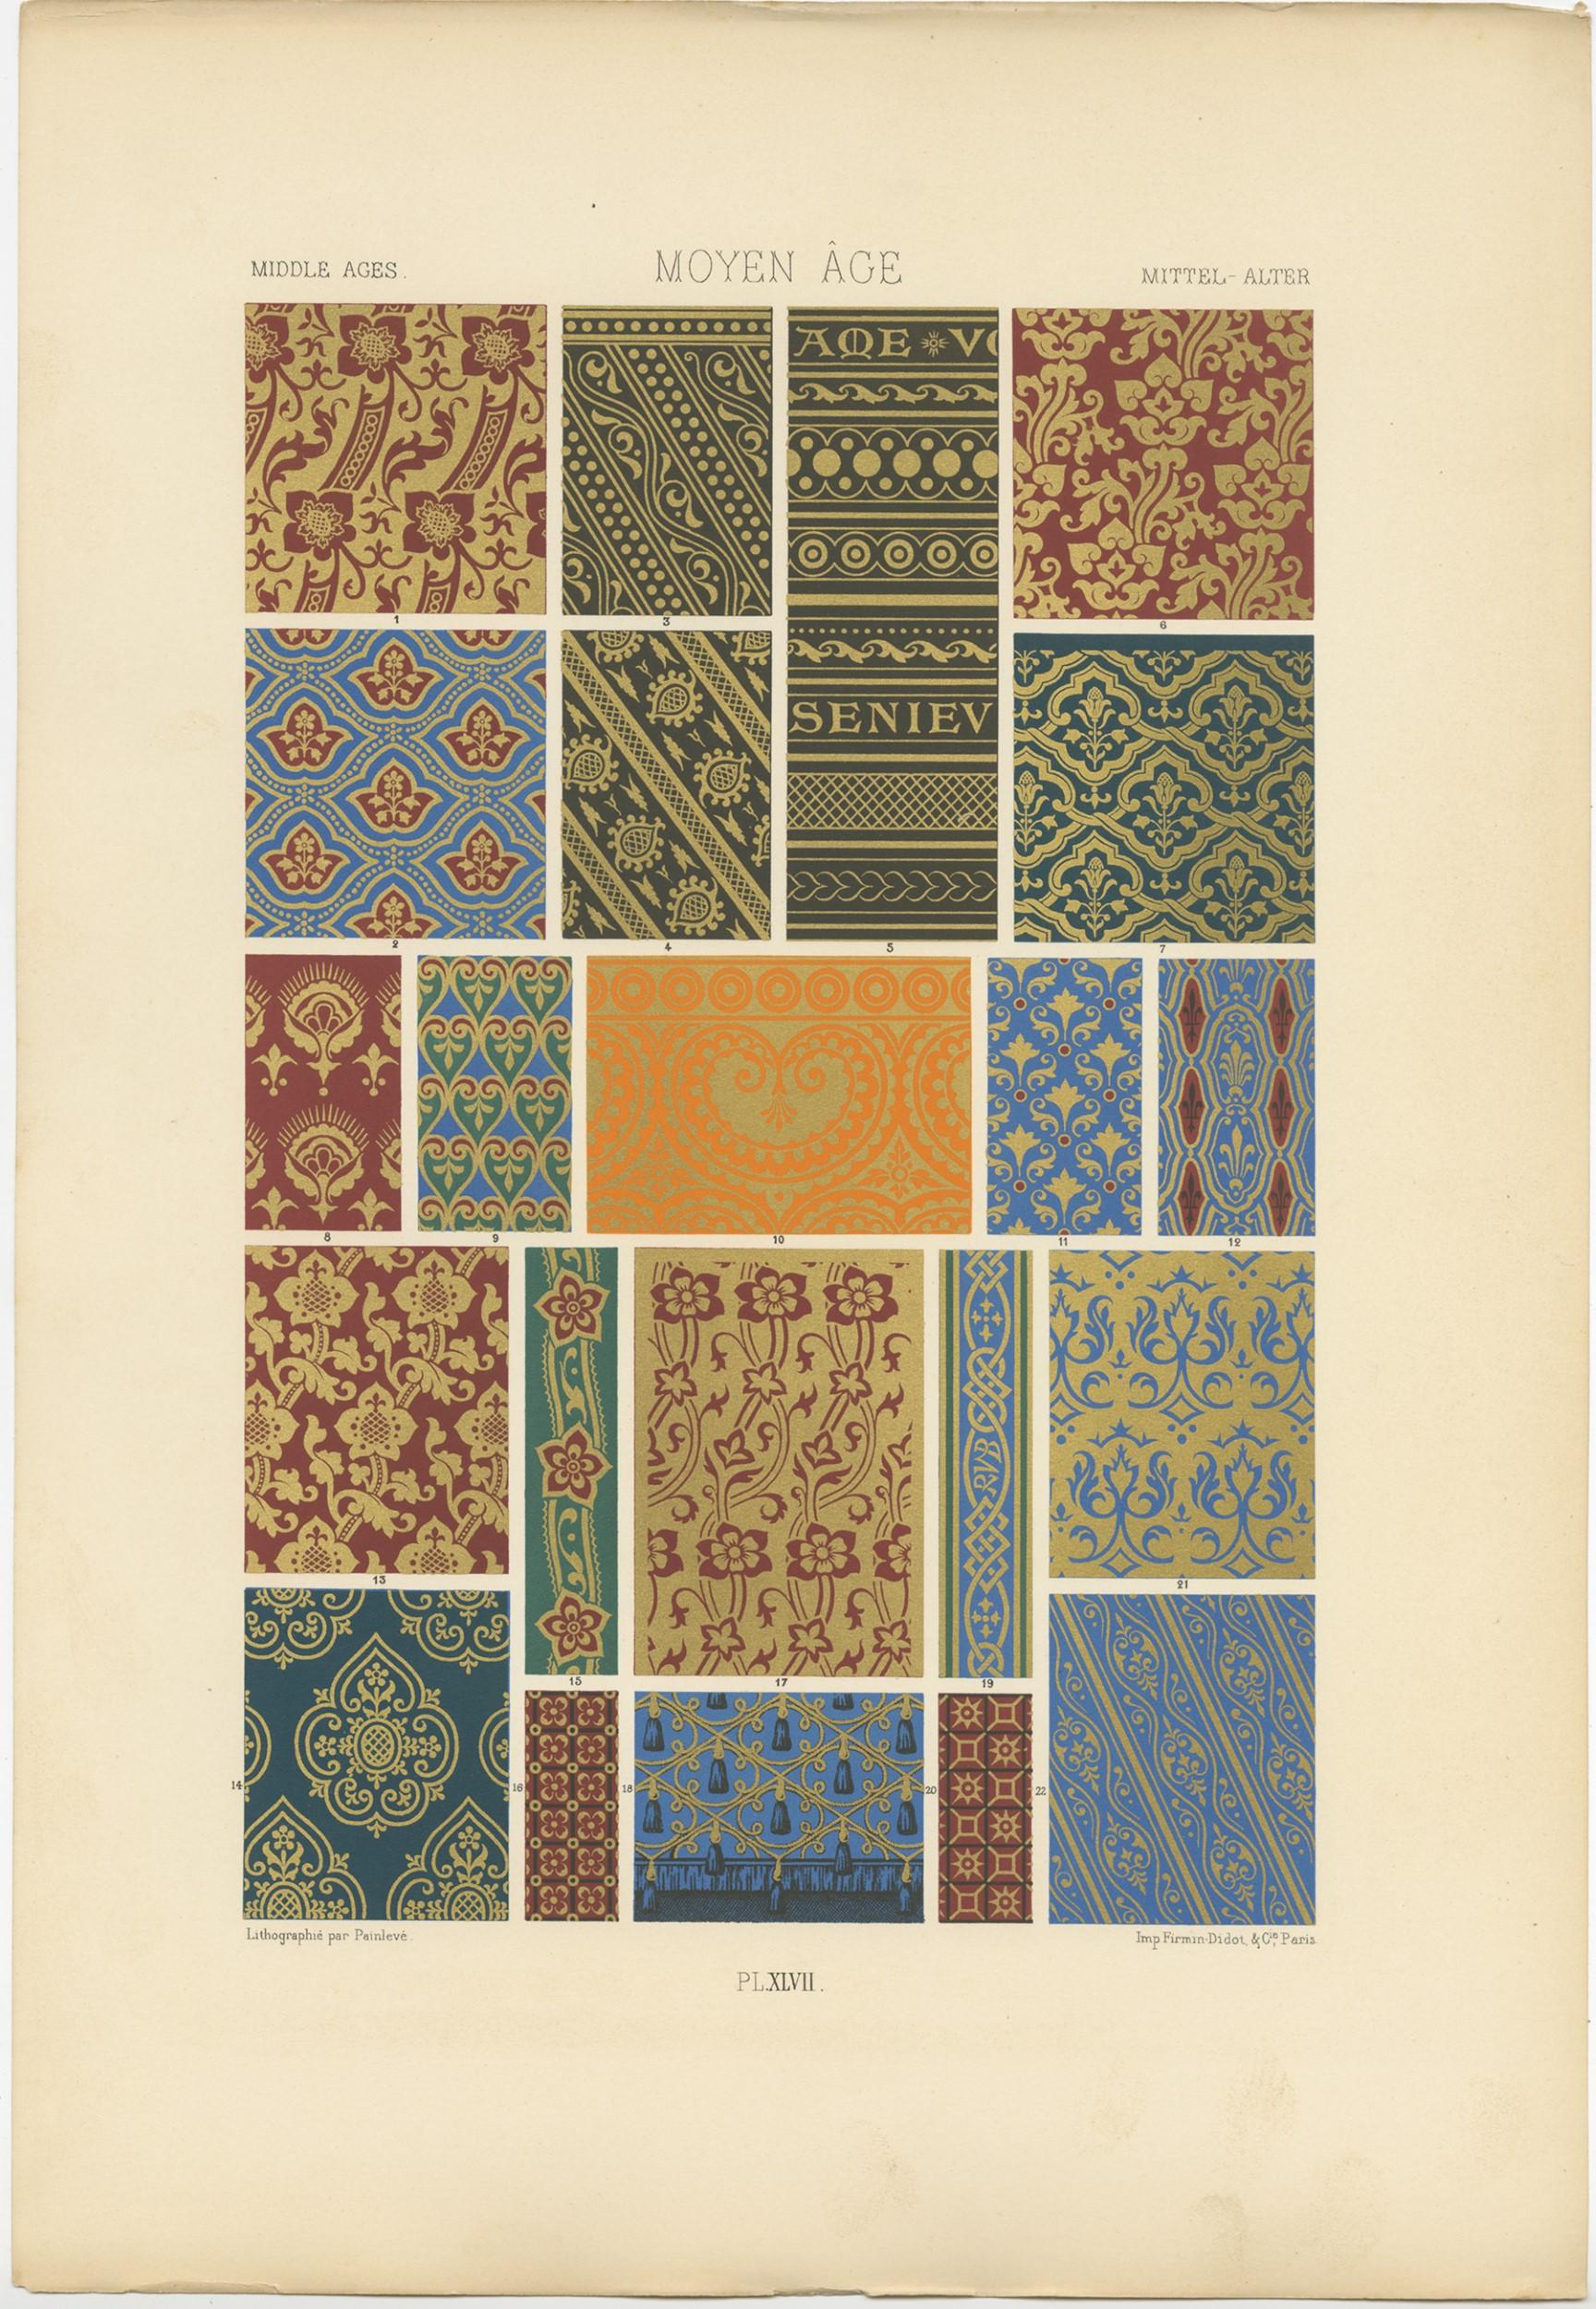 Antique print titled 'Middle Ages - Moyen Âge - Mittel Ages'. Chromolithograph of Middle Ages ornaments and decorative arts. This print originates from 'l'Ornement Polychrome' by Auguste Racinet. Published, circa 1890.